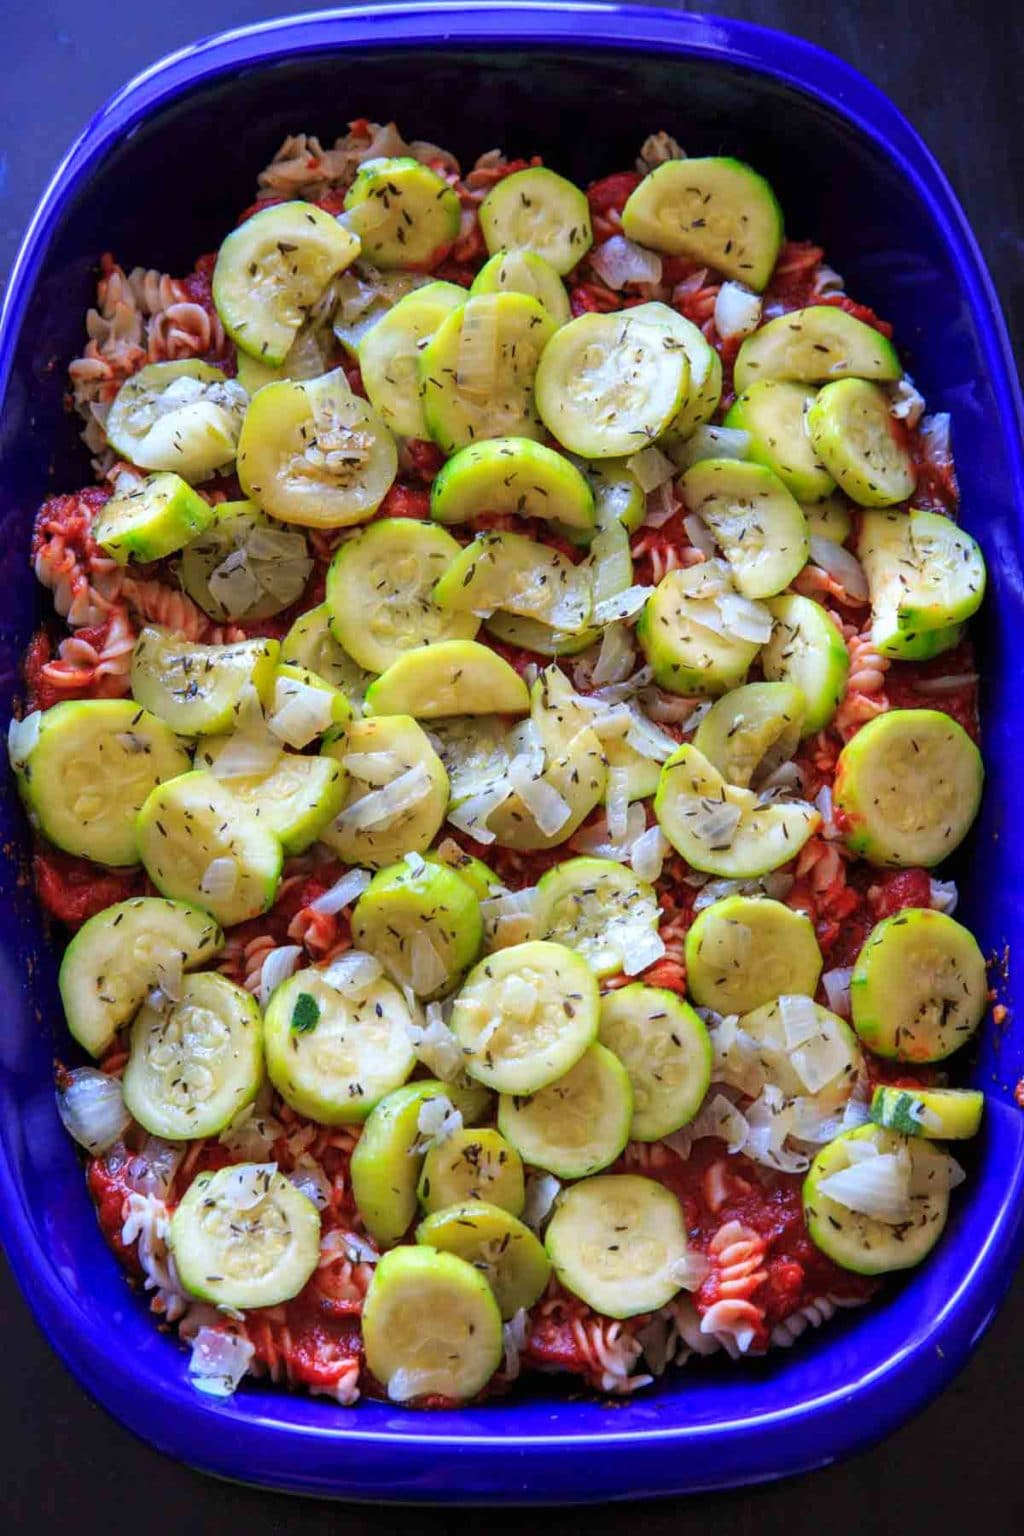 Zucchini Pasta Casserole with thyme. A super easy and healthy casserole that is healthy and easily gluten-free. With few ingredients (7 ingredients or less), dinner will be on the table in no time! Casserole before topping with cheese and baking.